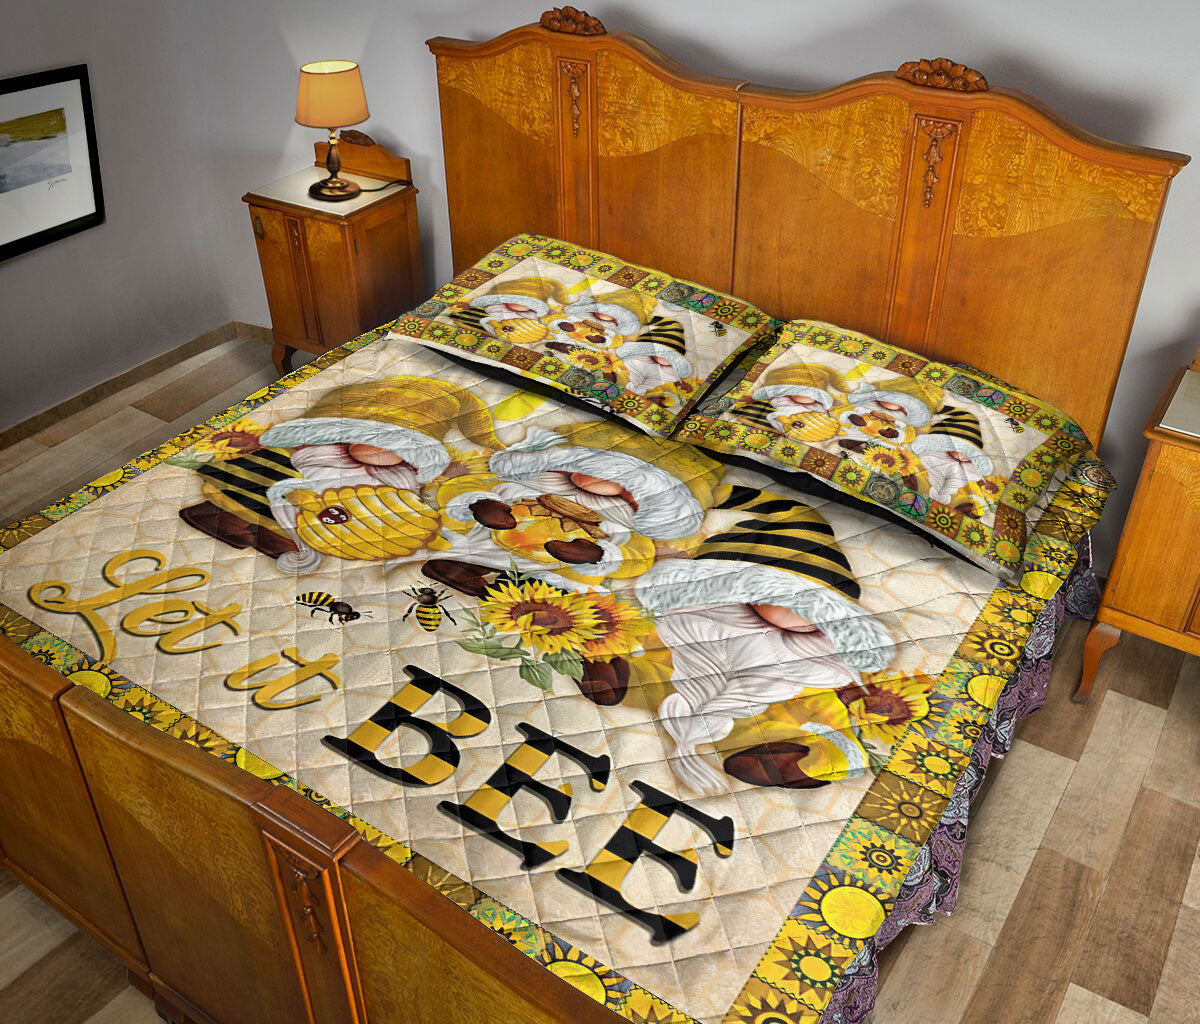 Ohaprints-Quilt-Bed-Set-Pillowcase-Bumble-Honey-Bee-Let-It-Bee-Gnome-Yellow-Sunflower-Custom-Personalized-Name-Blanket-Bedspread-Bedding-2480-Queen (80'' x 90'')